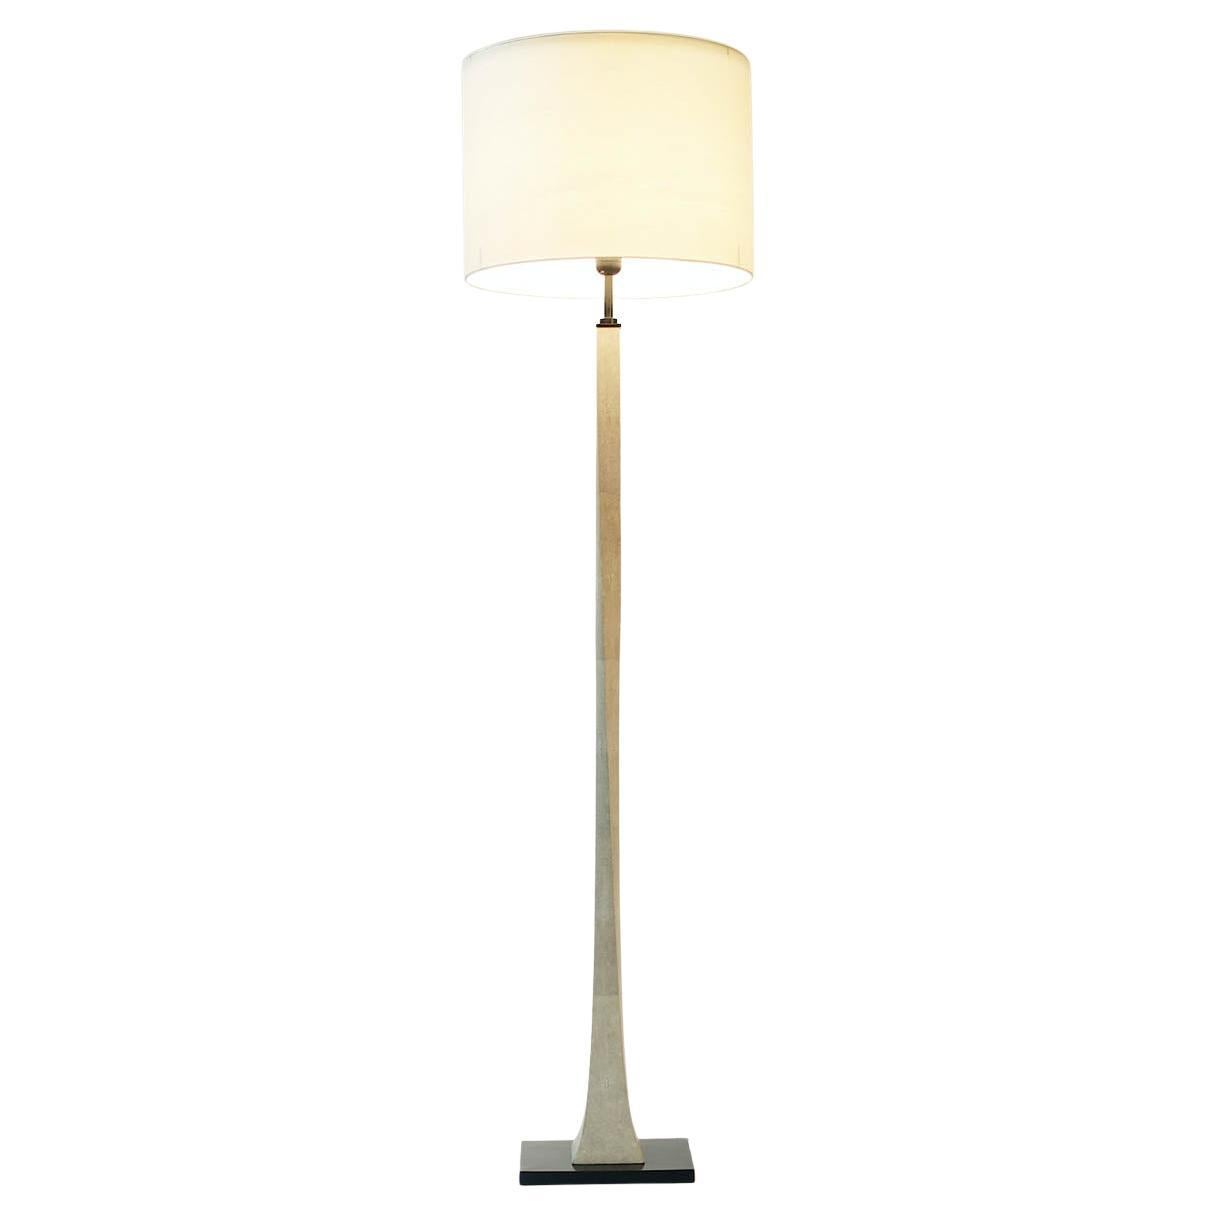 Ural Floor Lamp in Cast Bronze and Speckled Oyster Shagreen by Elan Atelier